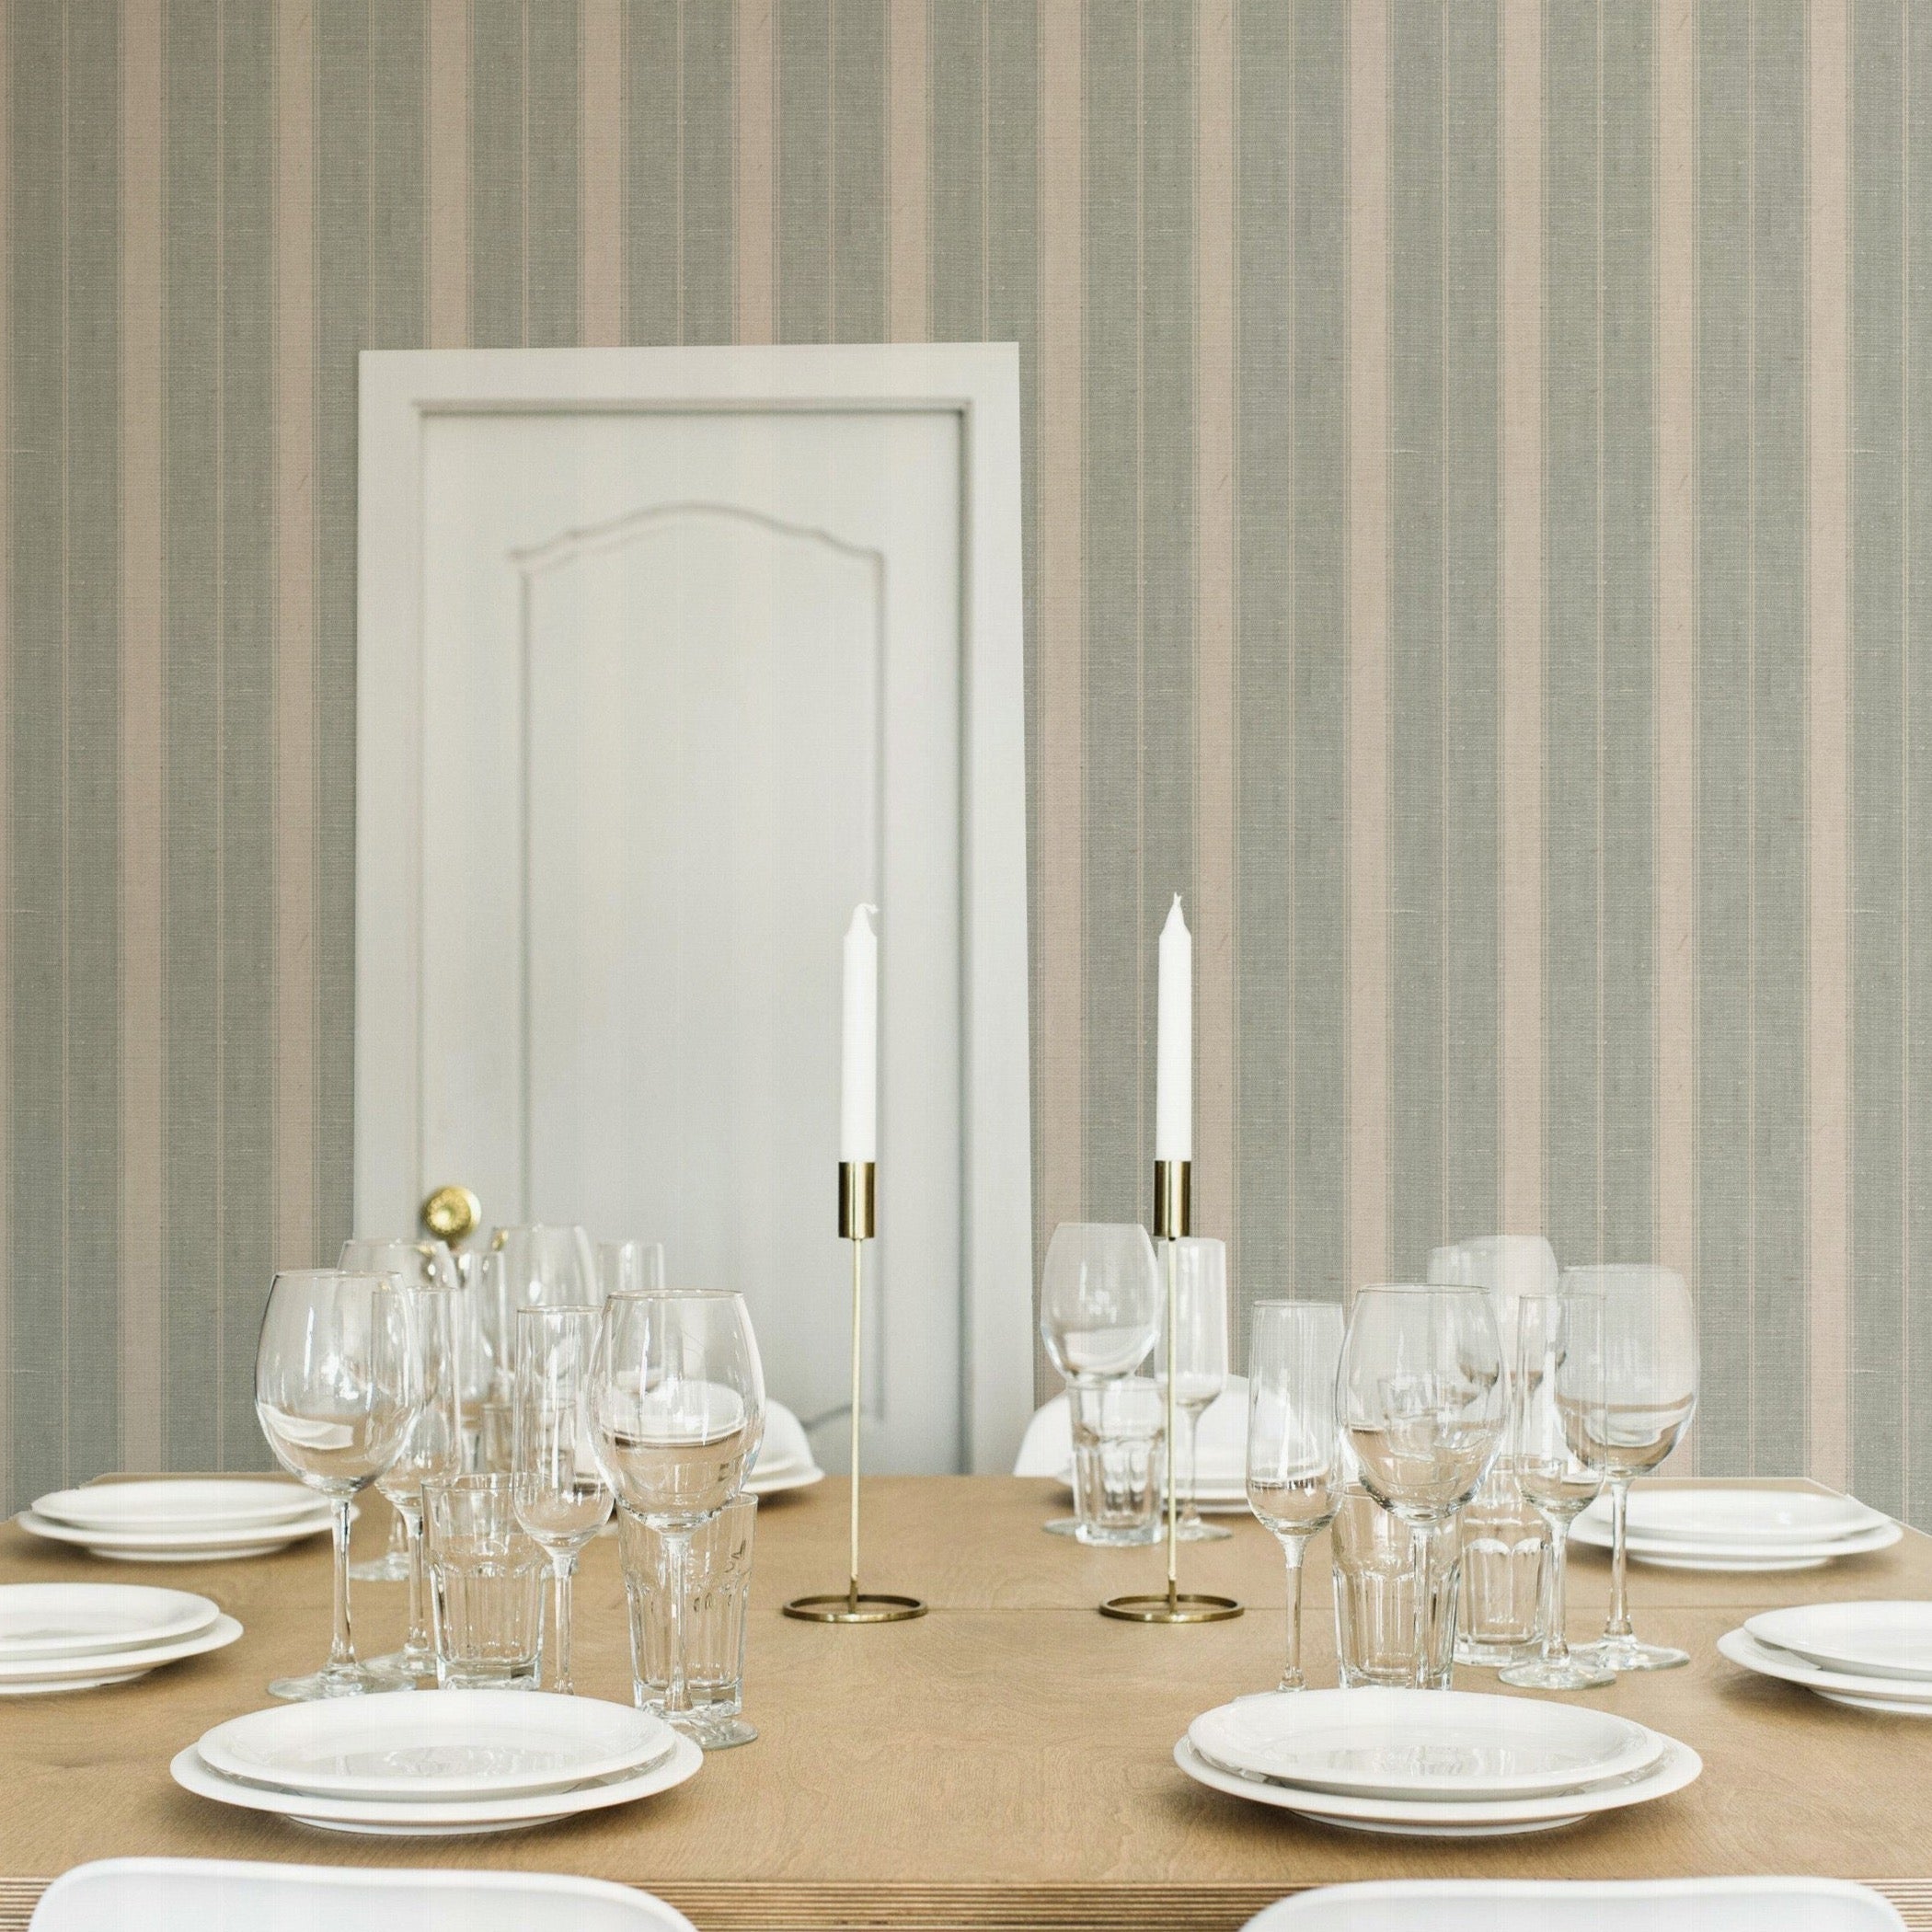 Elegant dining setting with 'Burlap Striped Wallpaper' providing a textured backdrop of vertical stripes, blending seamlessly with a sophisticated table arrangement and white chairs